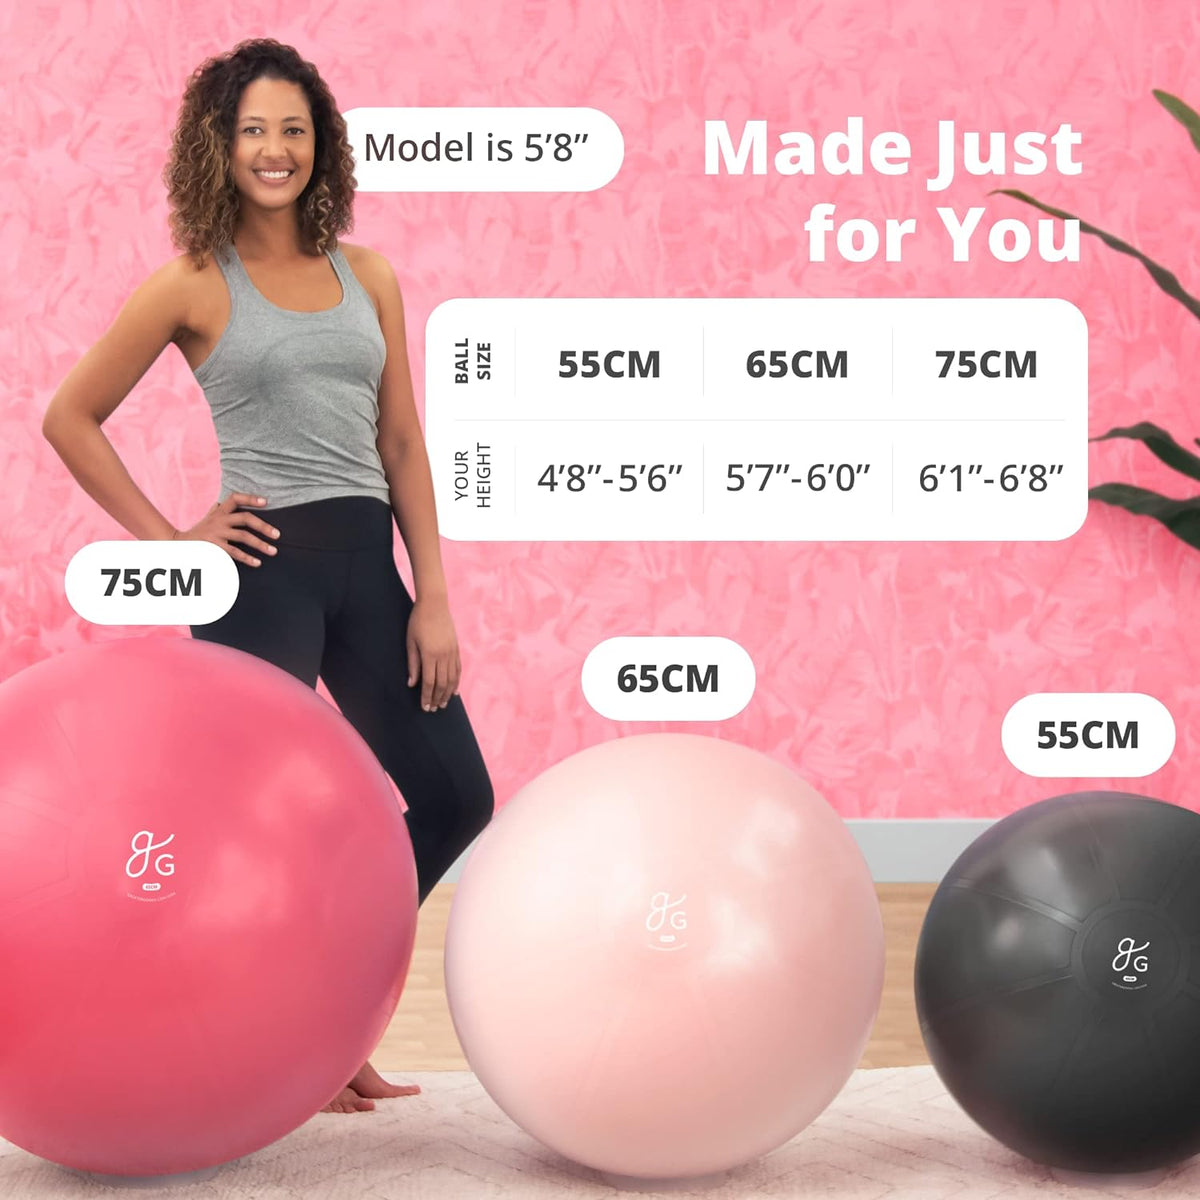 Greater Goods Exercise Ball (65cm) and Yoga Mat with Free Carrying Strap Bundle, Blush Pink